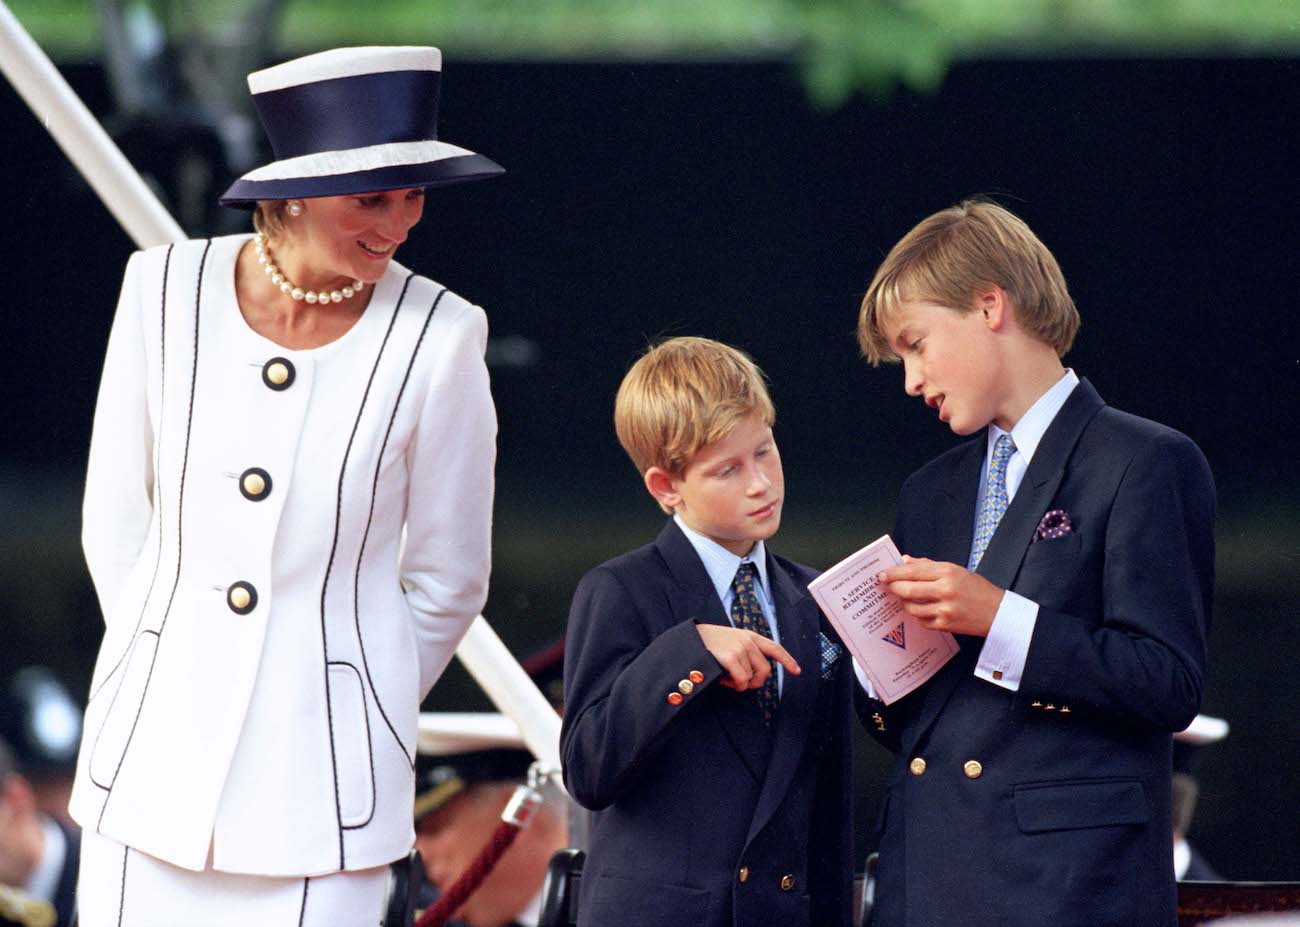 Princess Diana wearing a white outfit standing with Prince Harry and Prince William, who are wearing suits